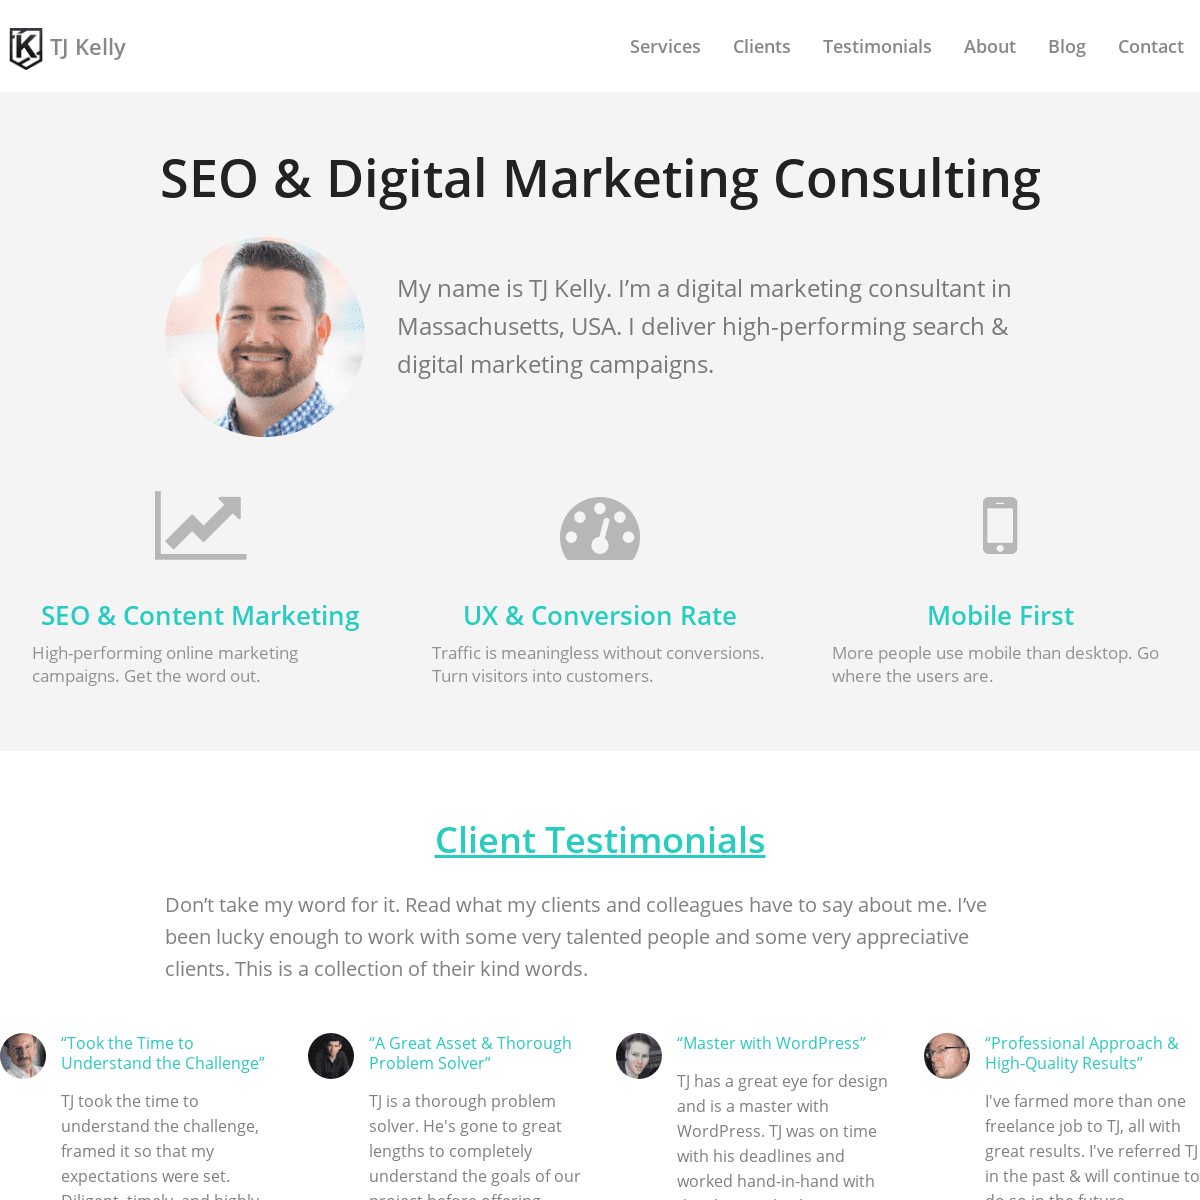 TJ Kelly - SEO & Online Marketing Consulting - North Andover, MA